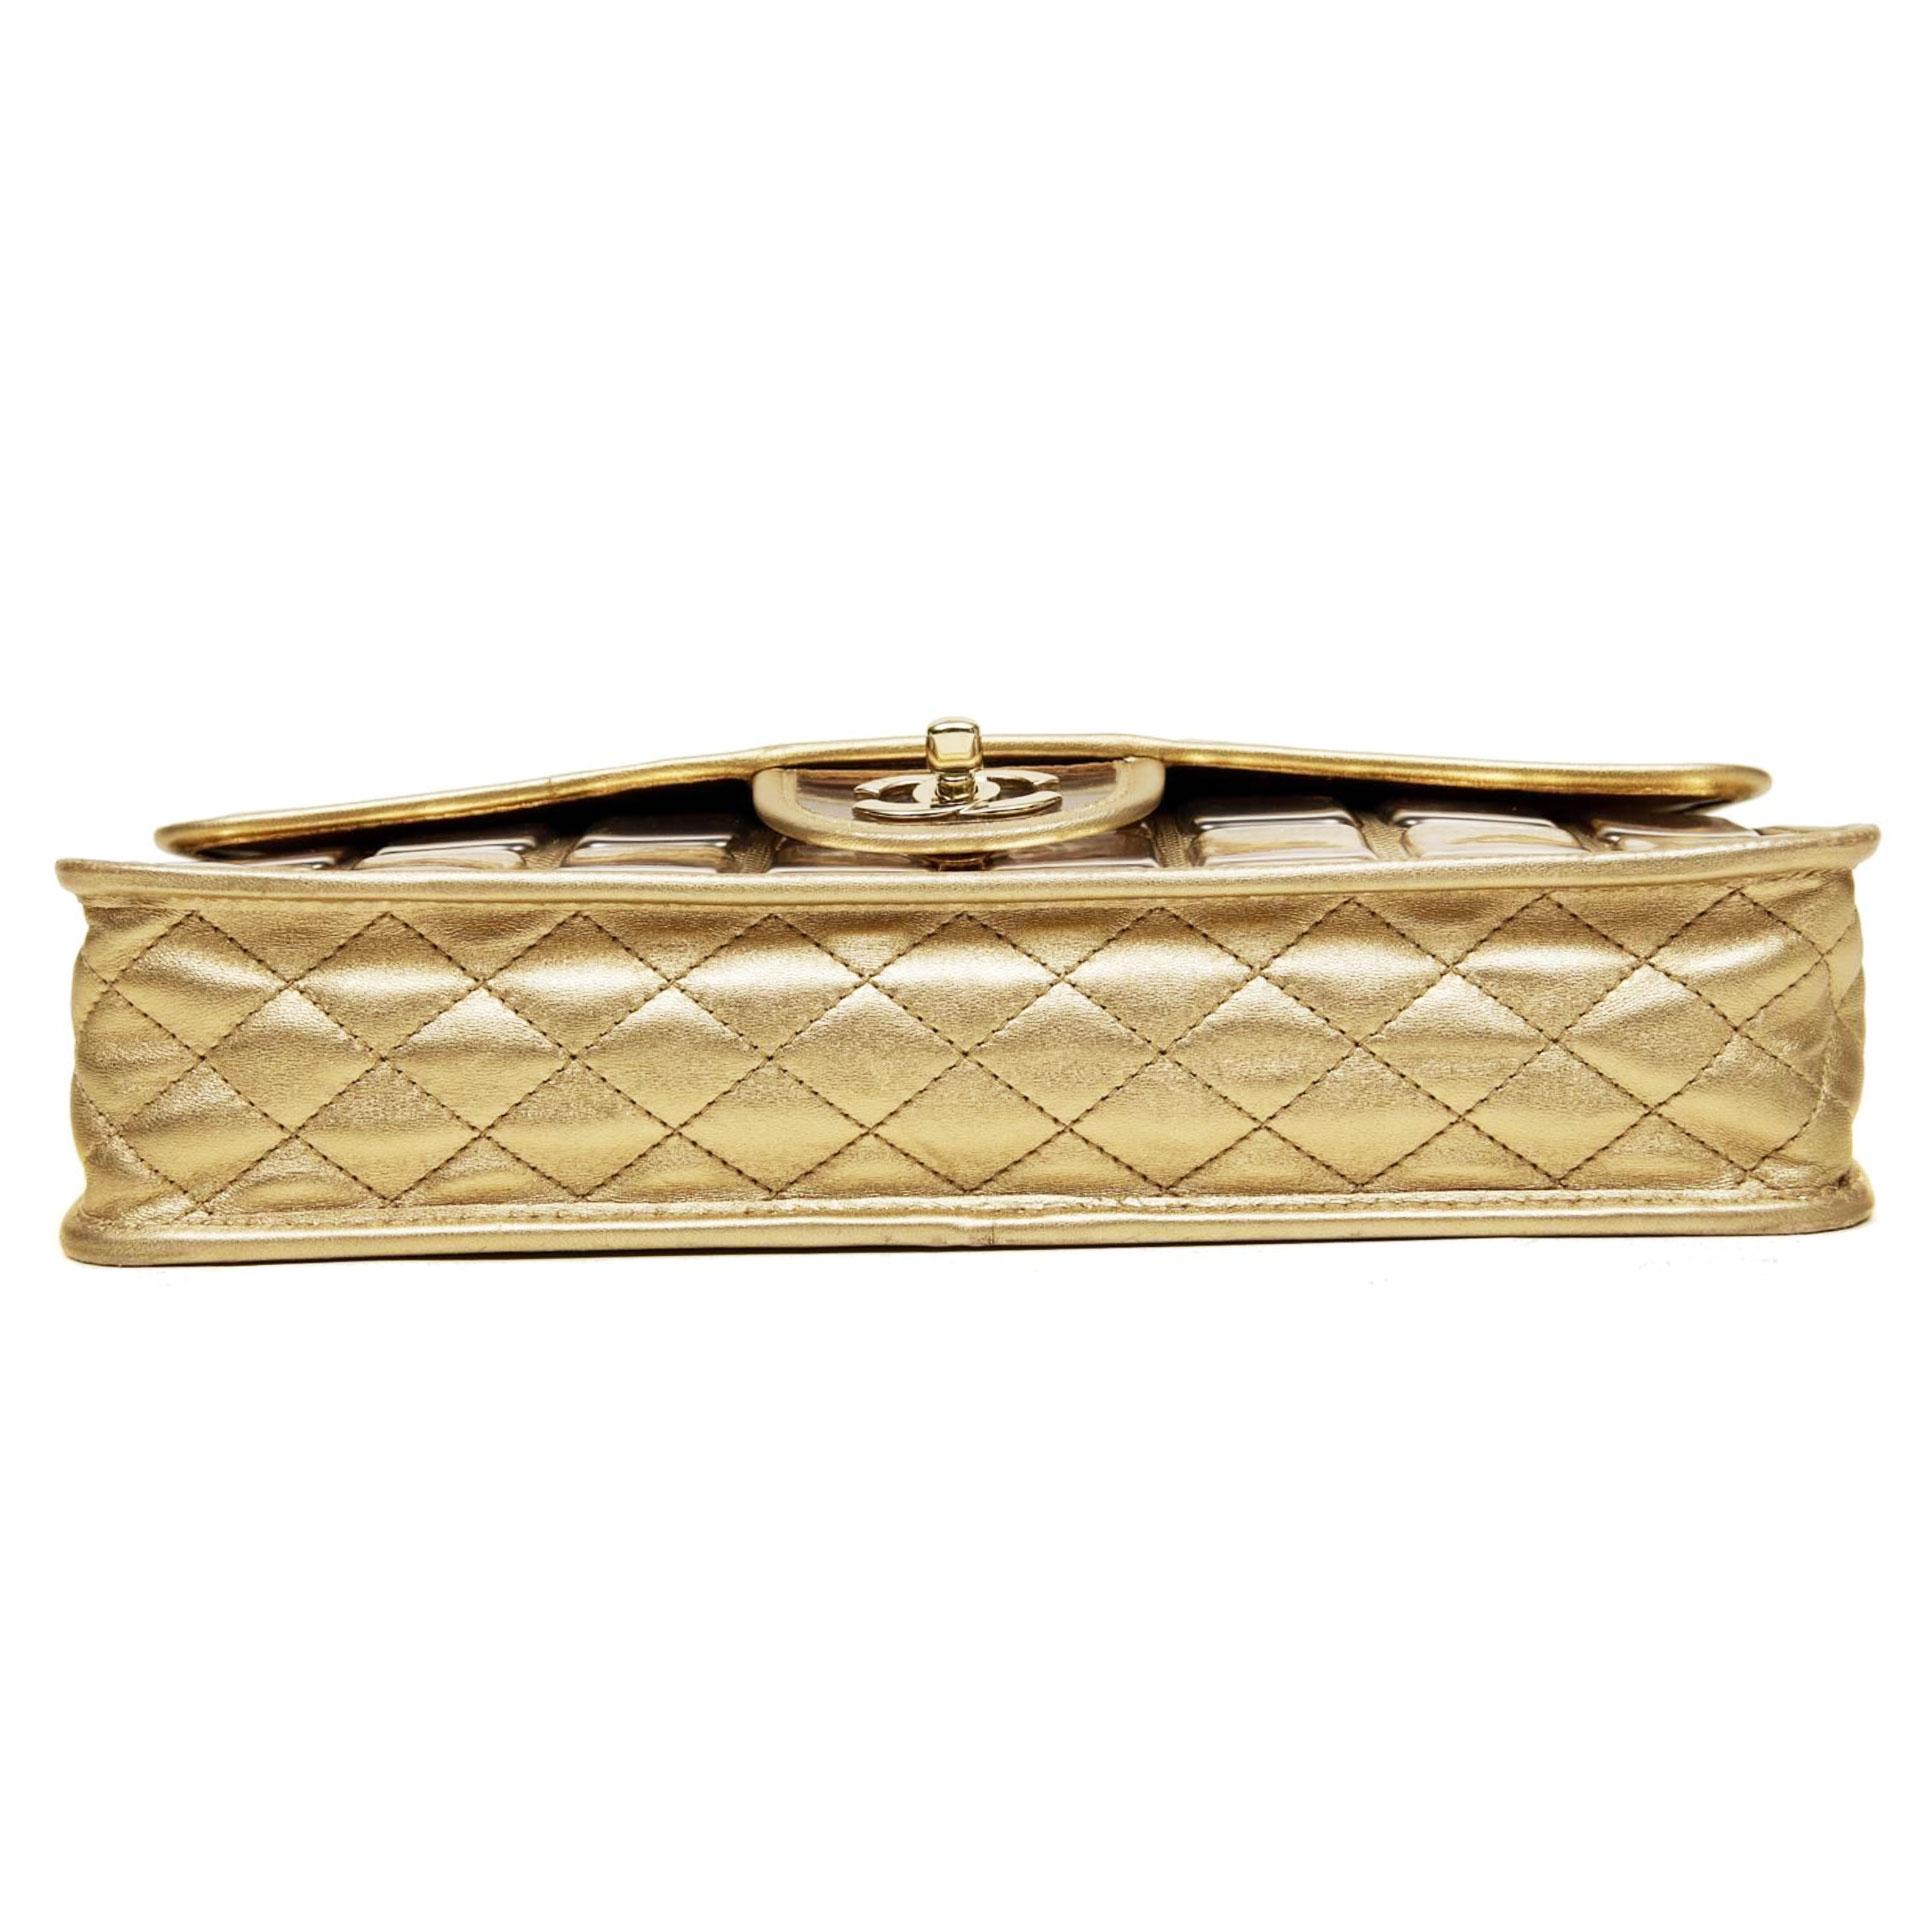 Chanel Limited Edition Ice Cube Flap Metallic Gold Lambskin Leather Shoulder Bag For Sale 6